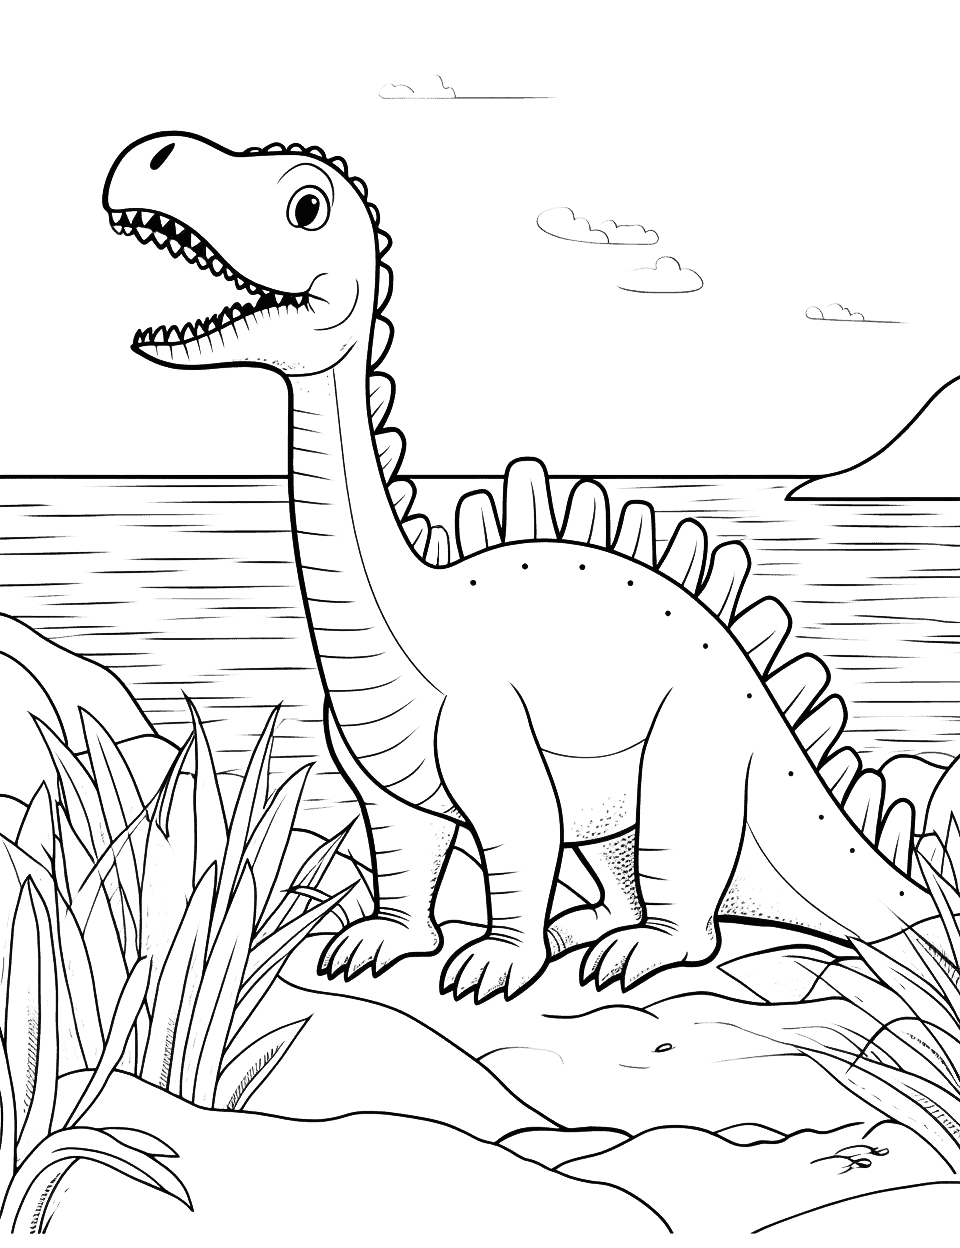 Spinosaurus on the Shore Dinosaur Coloring Page - A Spinosaurus looking out over the sea, looking for fish to eat.